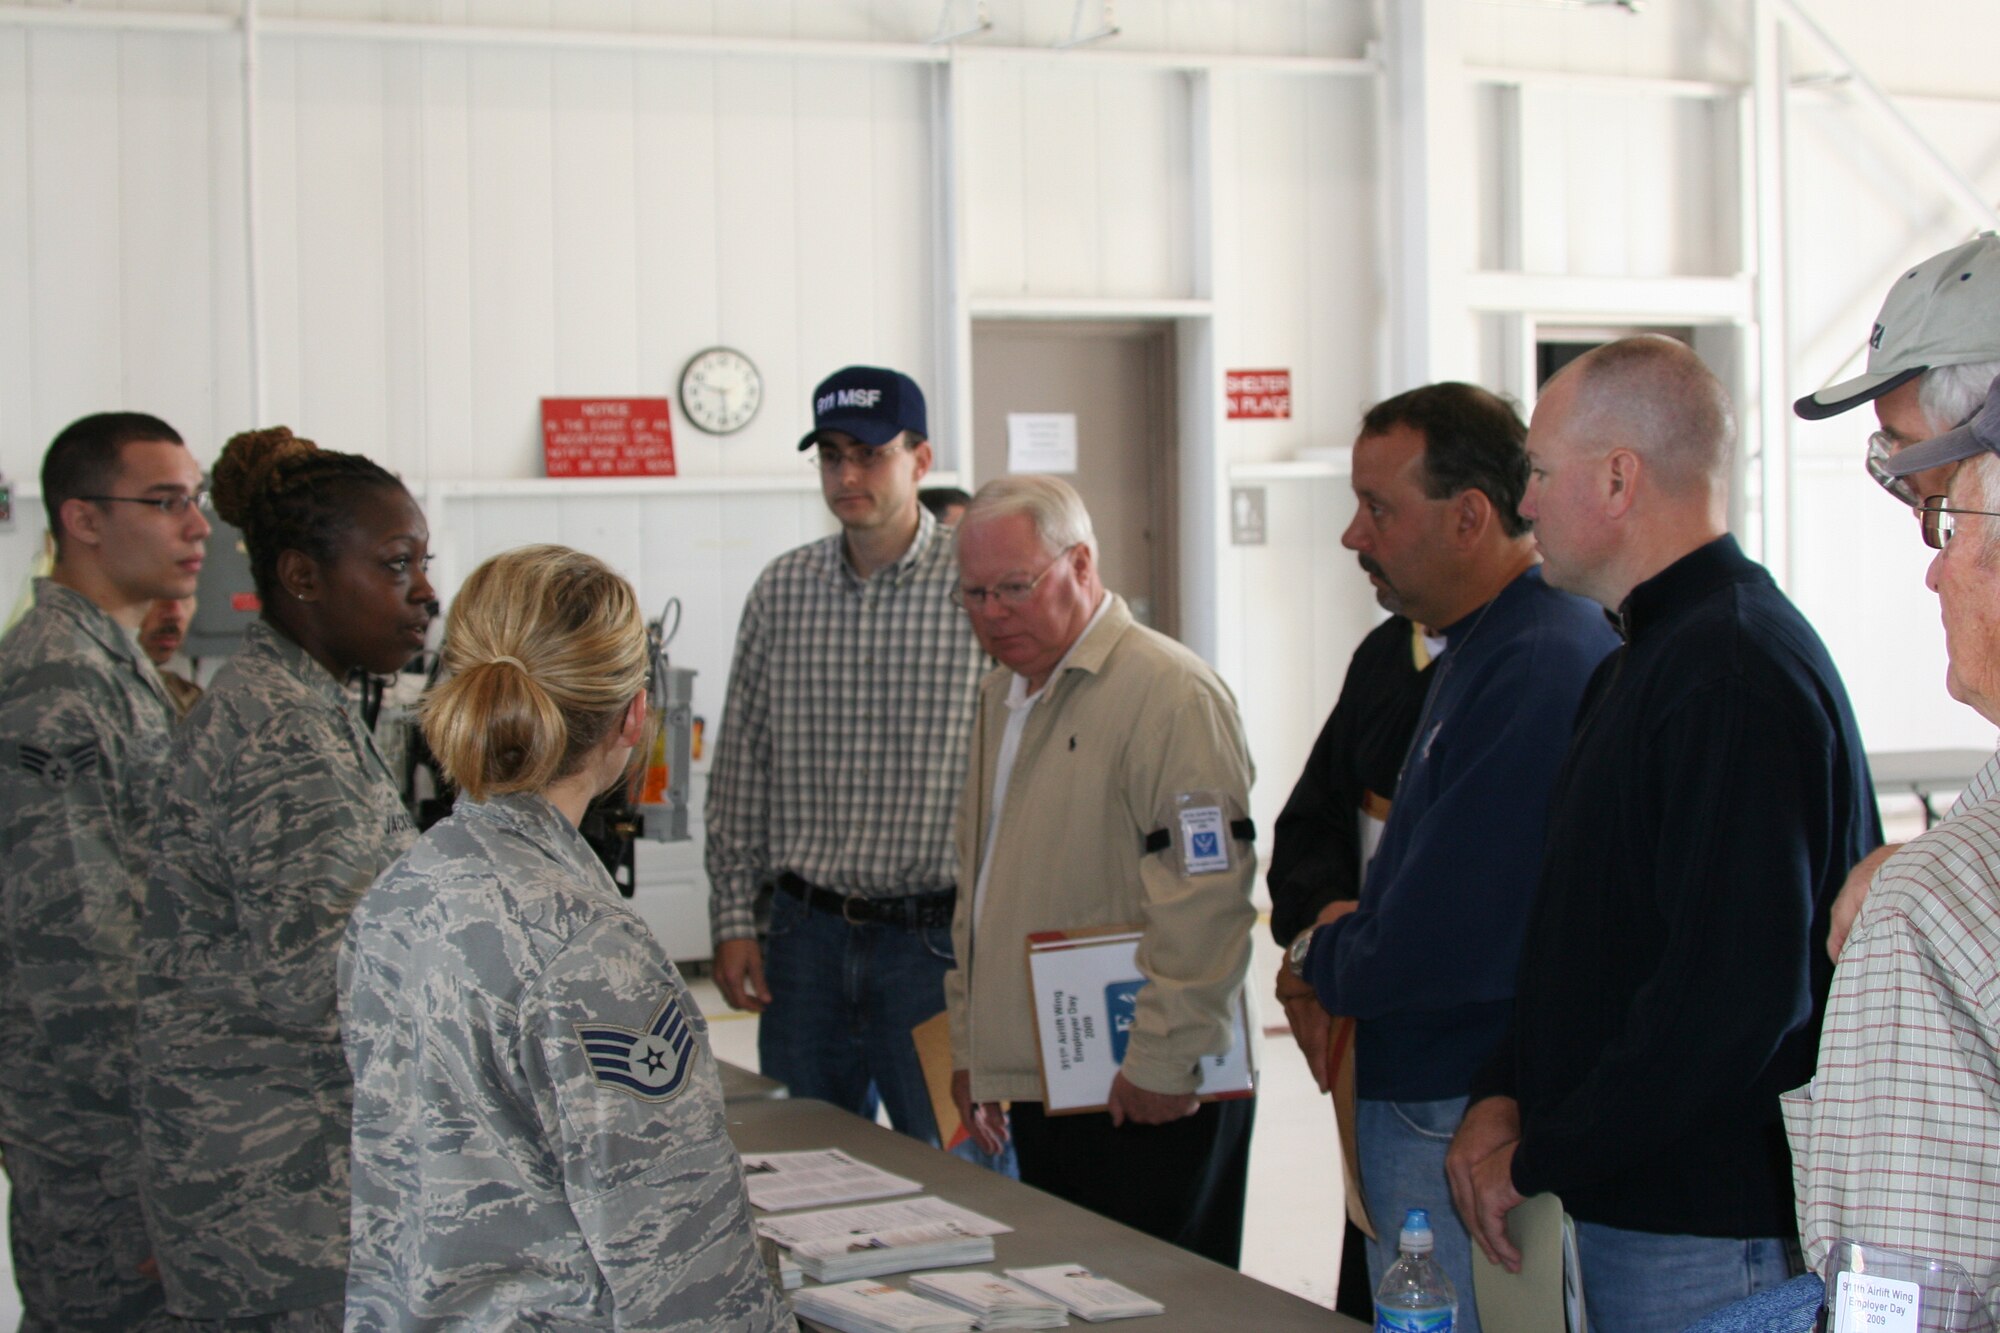 Local employer’s of 911th Airlift Wing Reservists visit the base June 6, 2009, for Employer’s Day 2009.  The event was tailored to give the employers a better understanding of the 911th mission and their employee’s role in completing the mission.